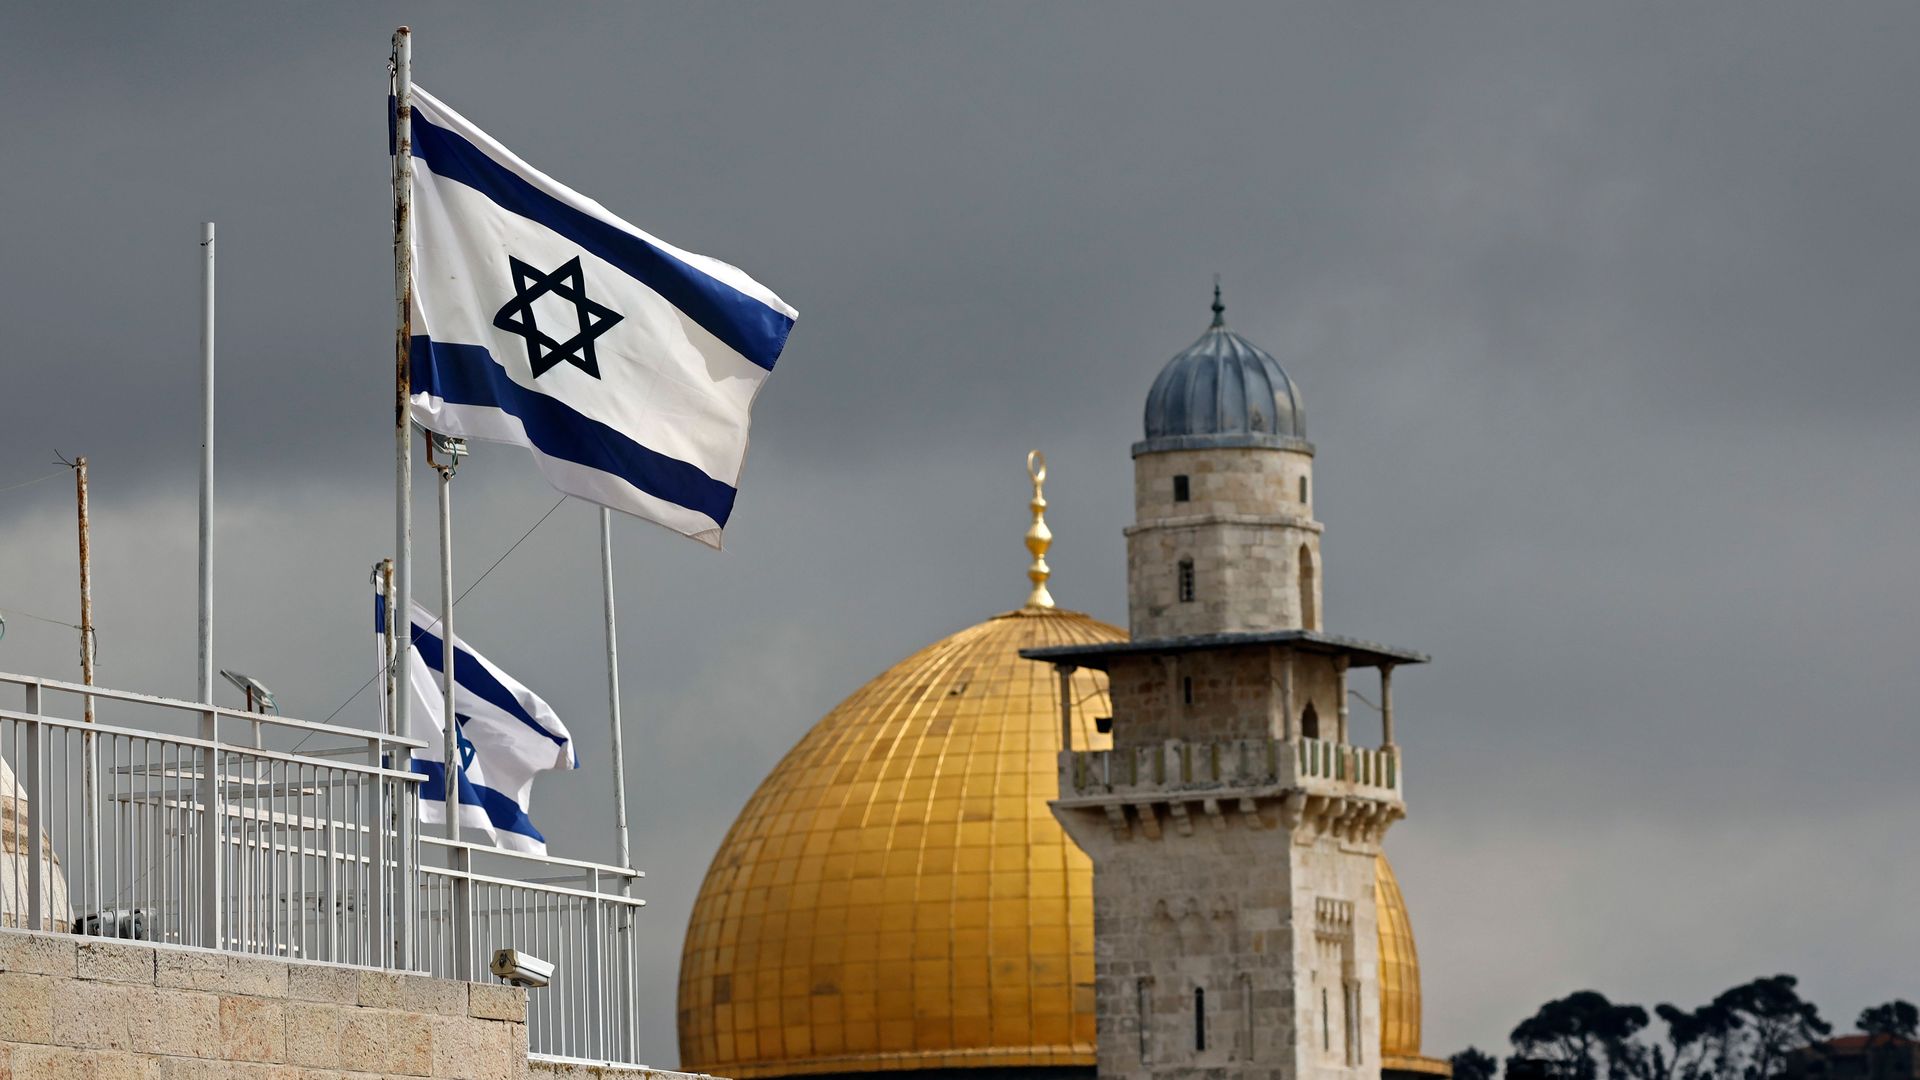 Israeli flags flutter in front of the Dome of the Rock in the Jerusalem's Old City, on February 19, 2019.